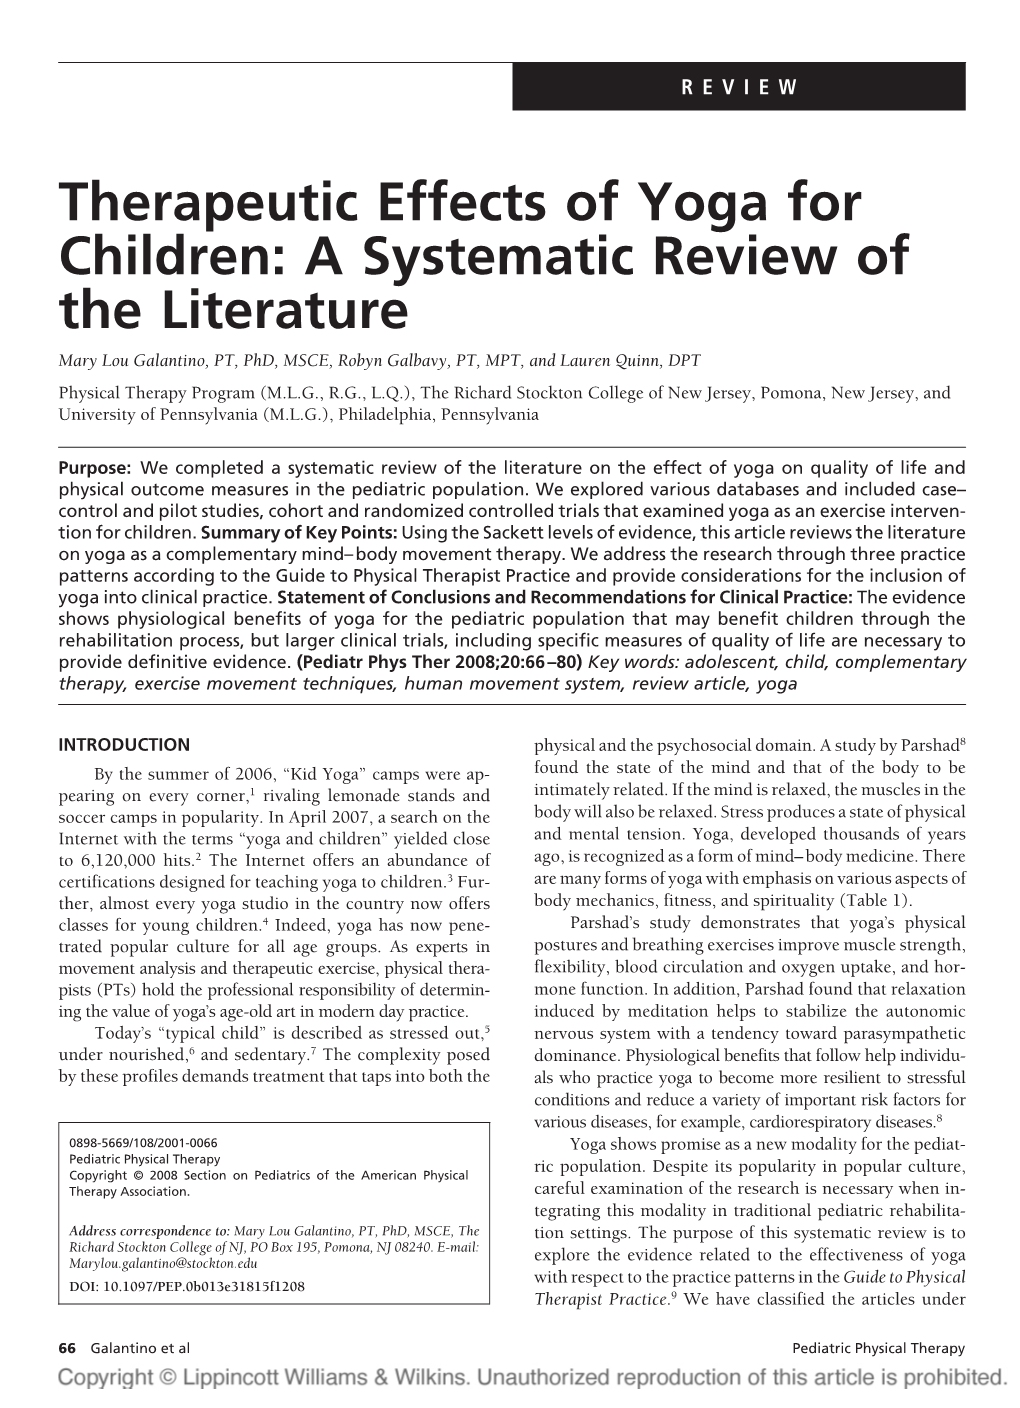 Therapeutic Effects of Yoga for Children: a Systematic Review Of